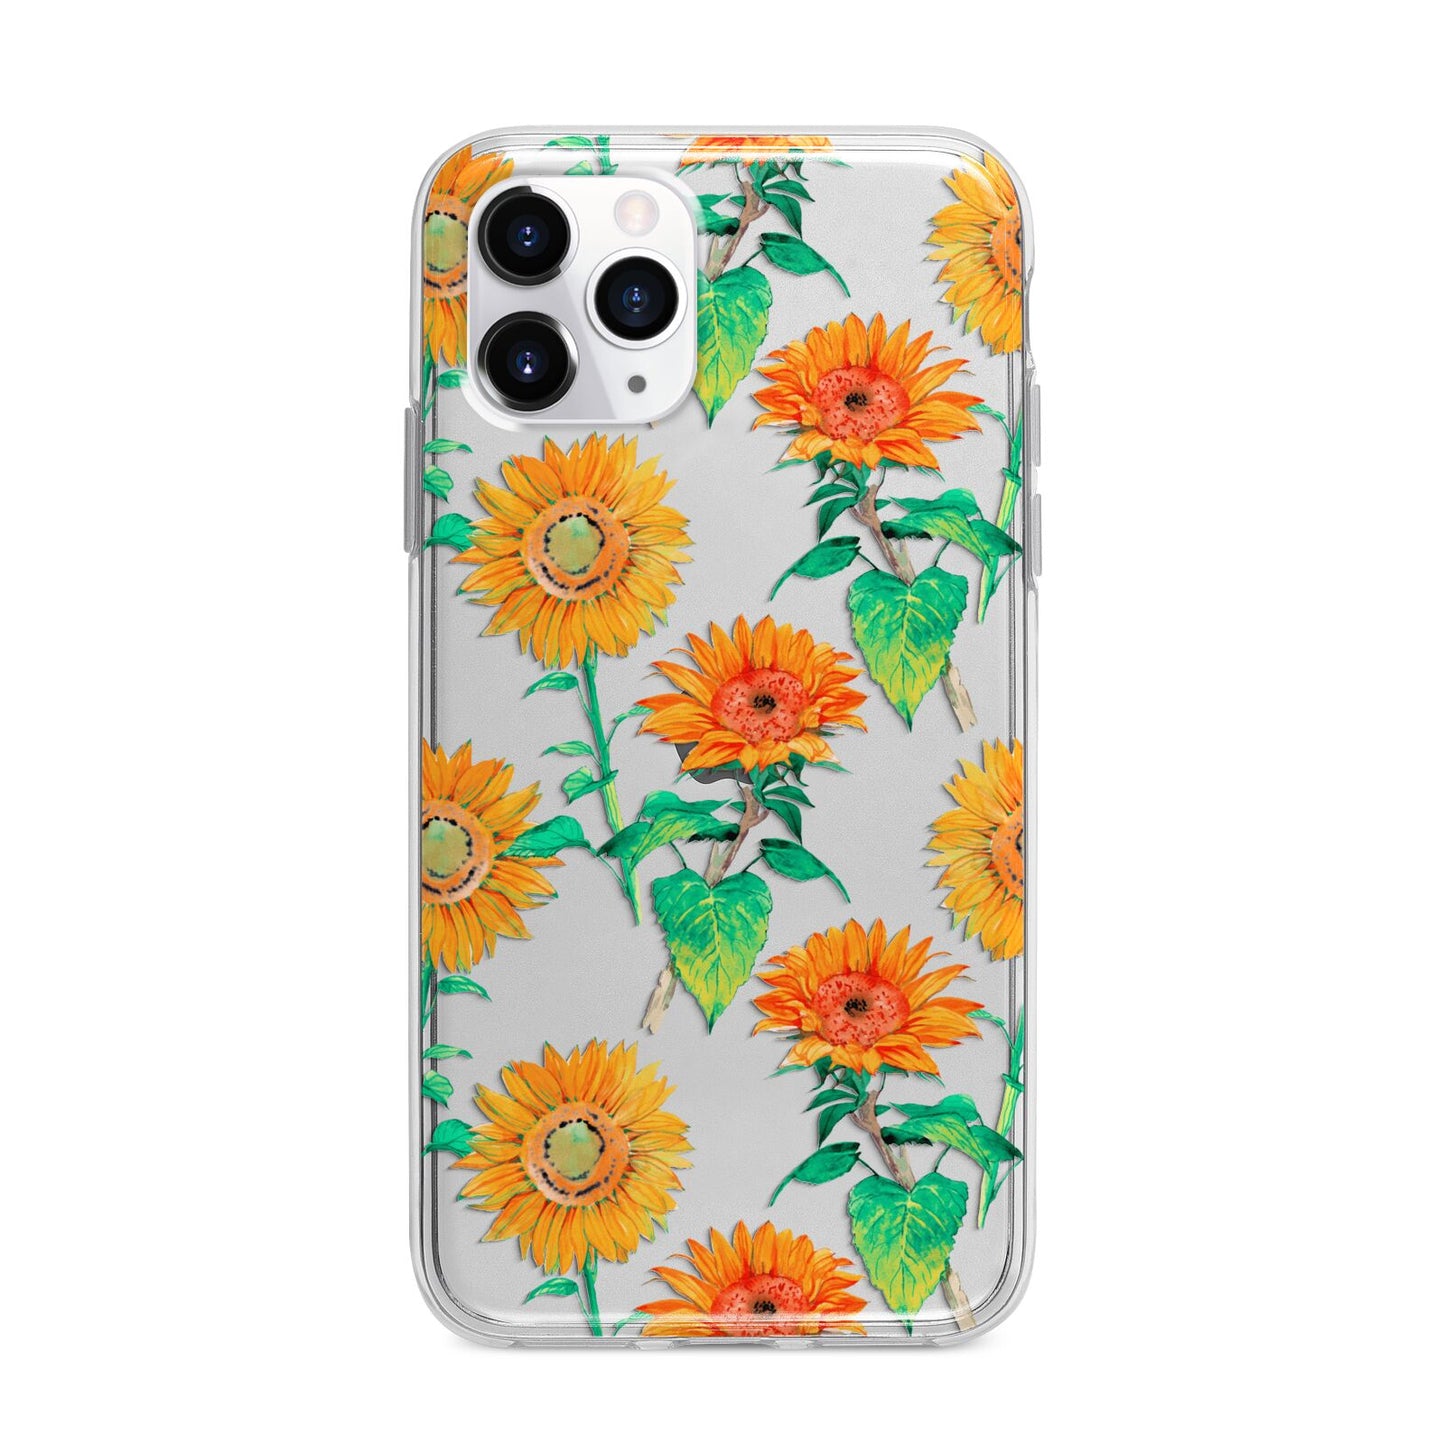 Sunflower Pattern Apple iPhone 11 Pro Max in Silver with Bumper Case